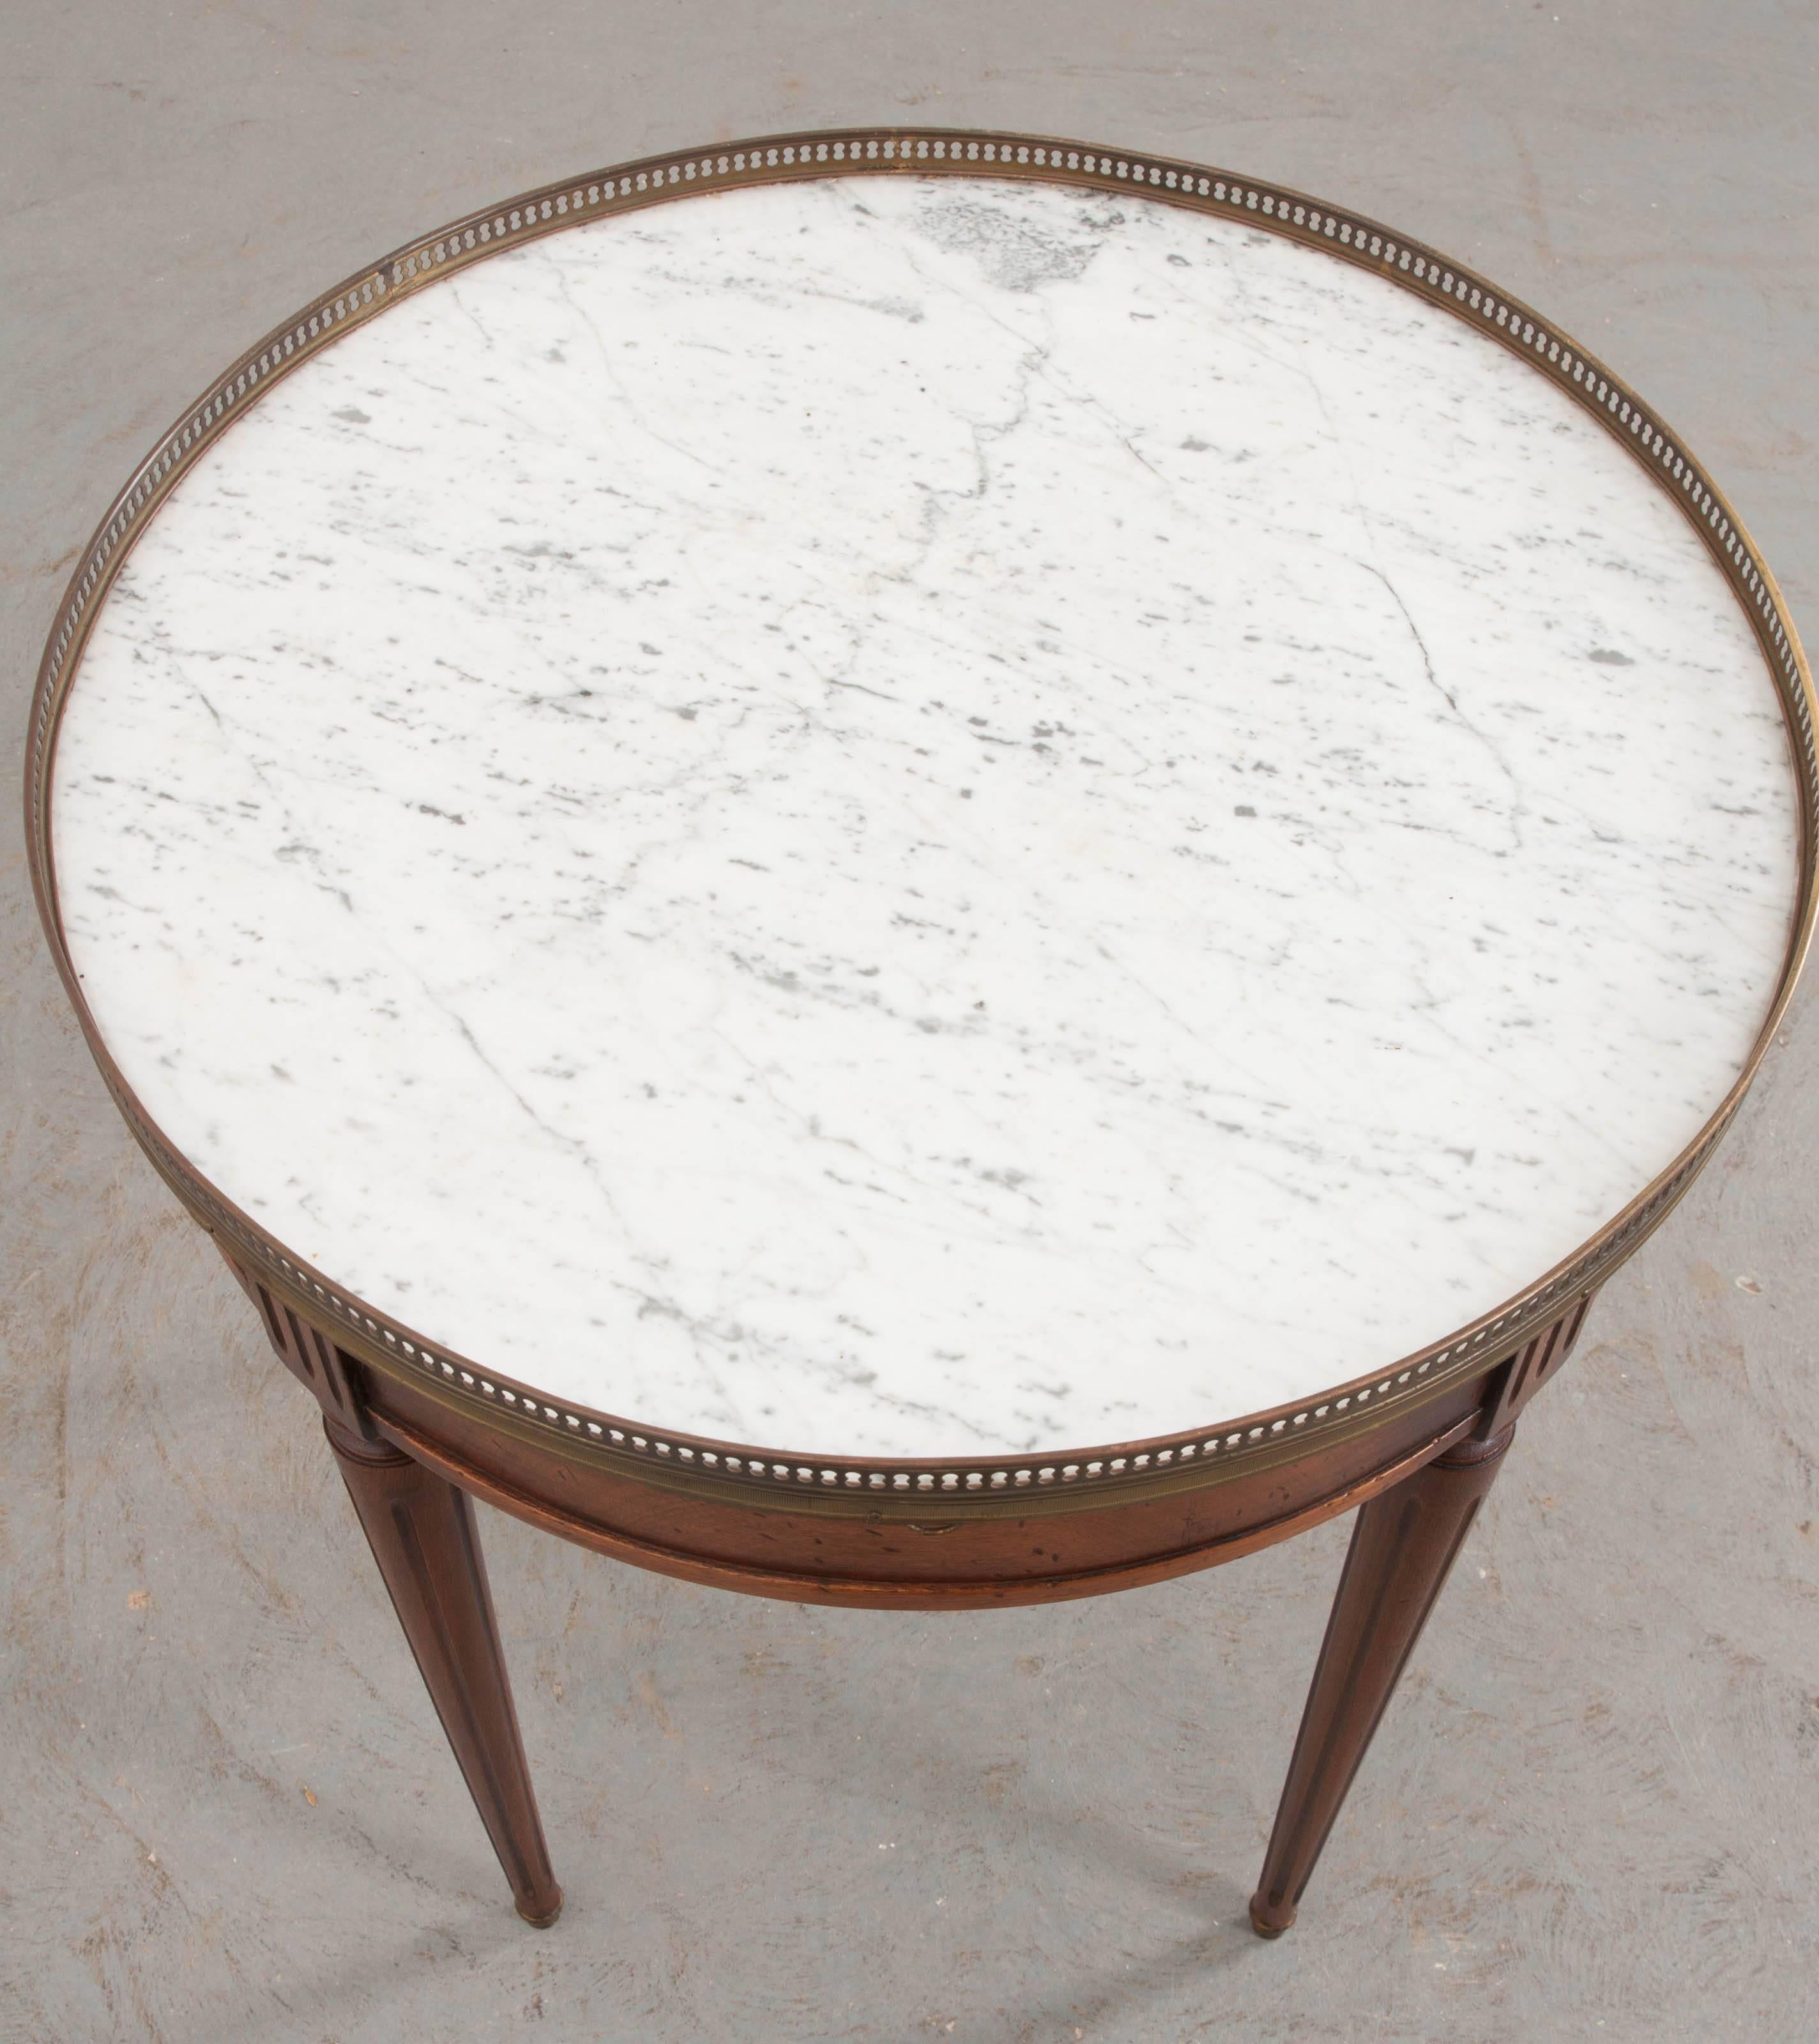 This Louis XVI style gueridon was made in France, at the end of the 19th century, using exceptional mahogany and marble. The table features a beautiful white, round marble top, with grey speckles, that is encircled by a pierced brass gallery. The